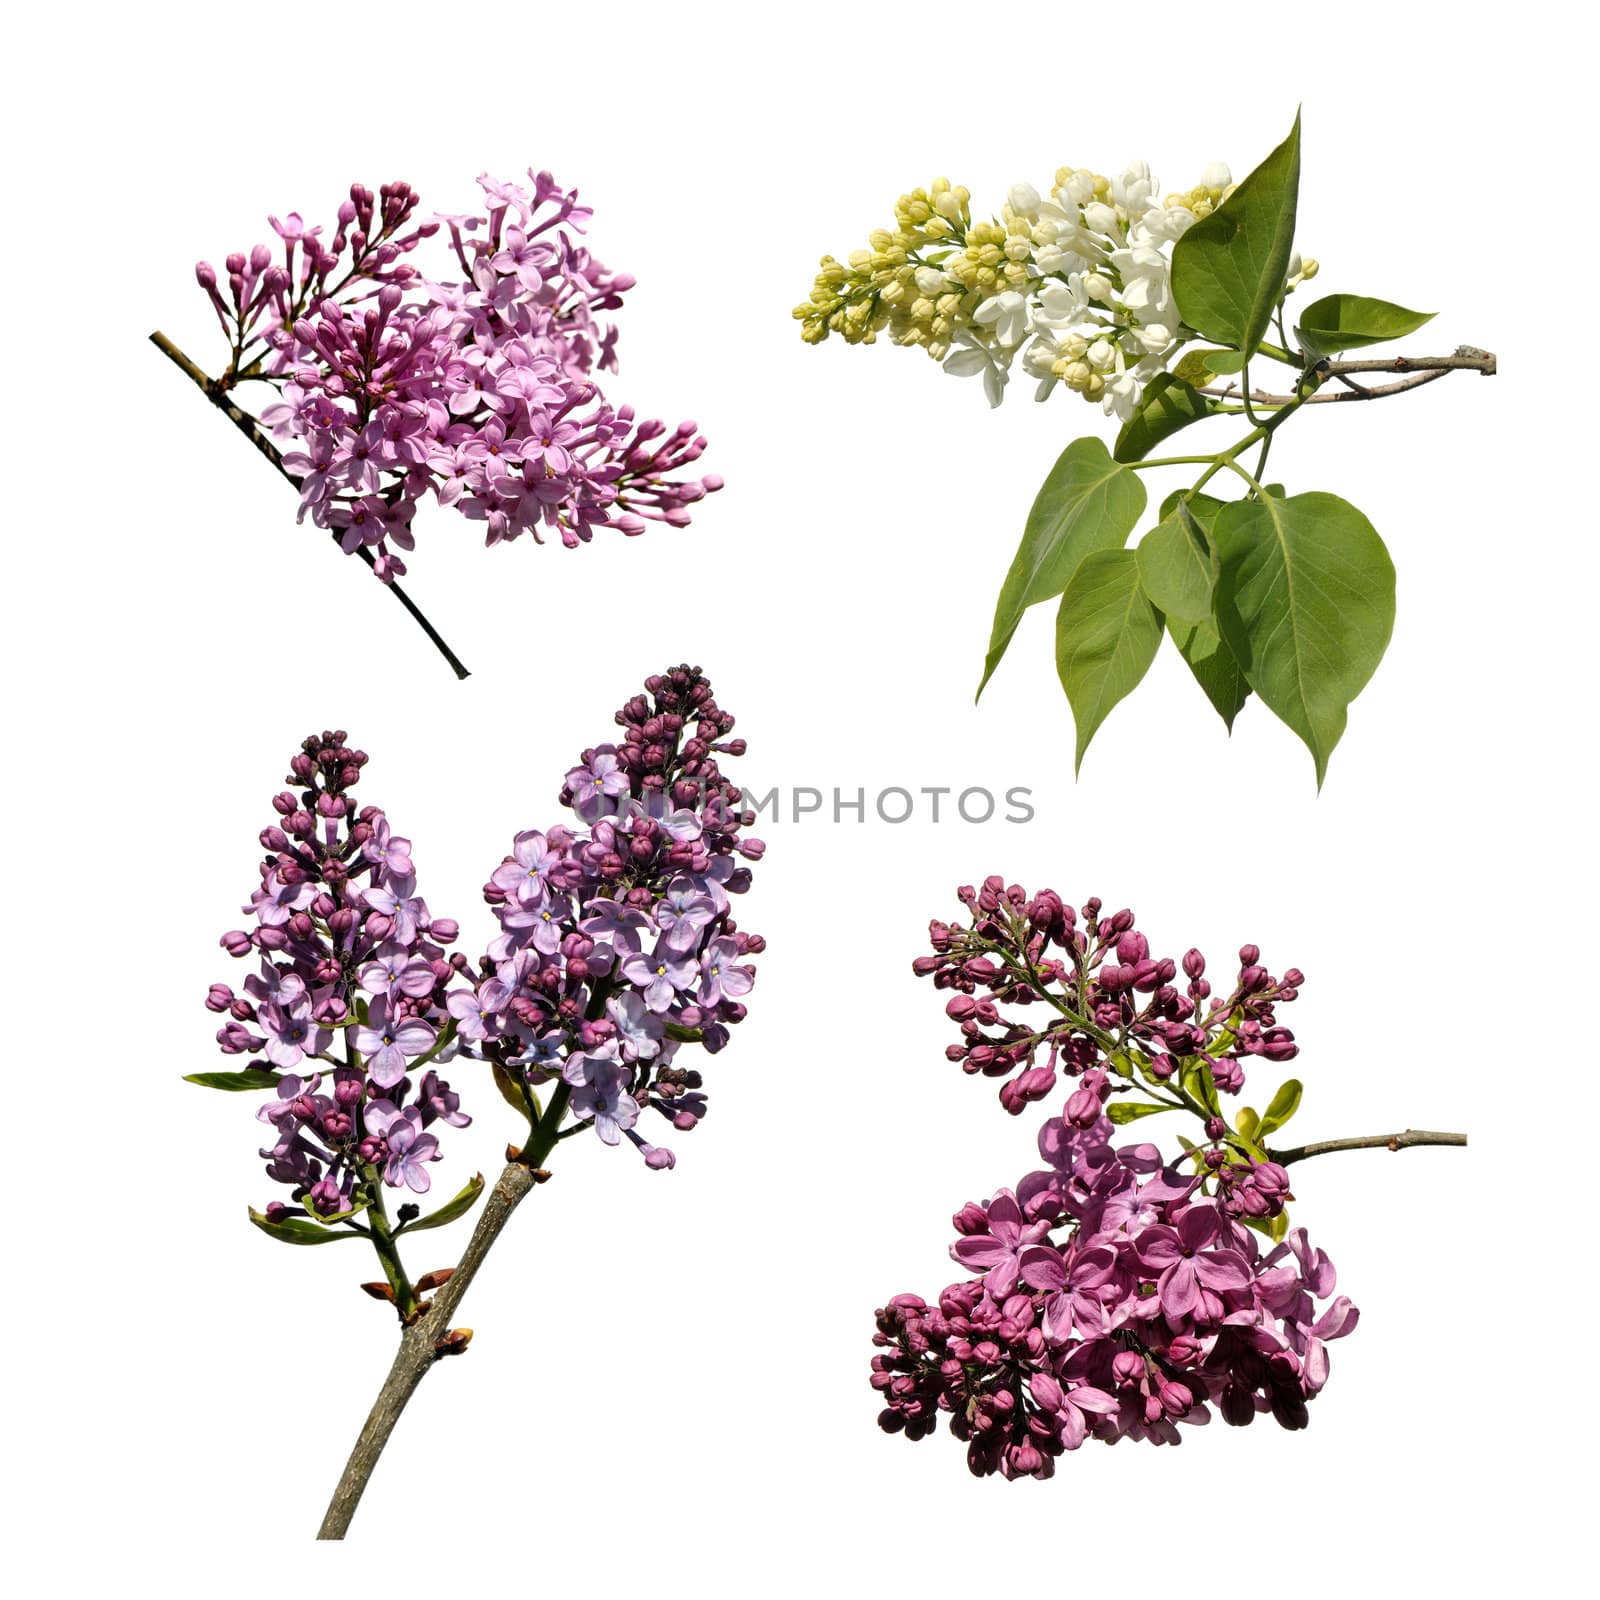 Assorted lilacs by Hbak